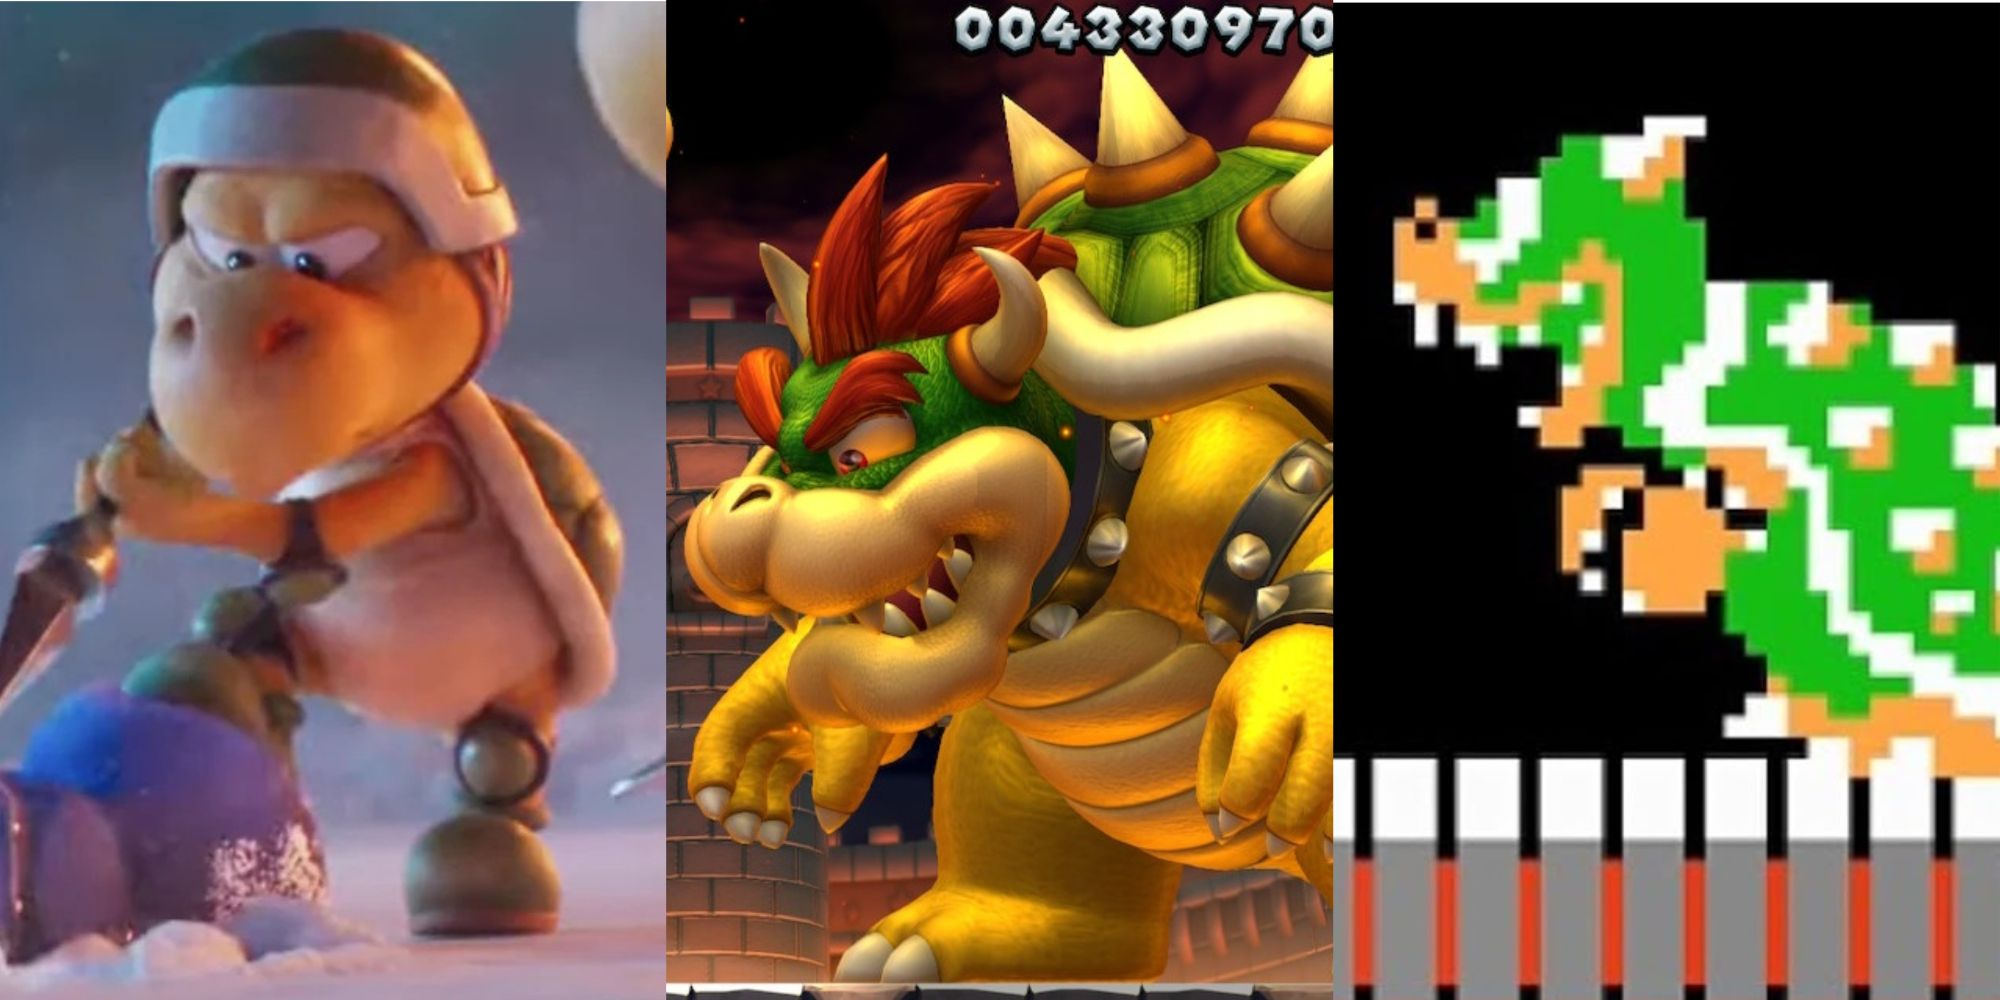 A split image of a Koopa Troopa from the Mario movie and two instances of Bowser, one from New Super Mario Bros. and one from Super Mario Bros.